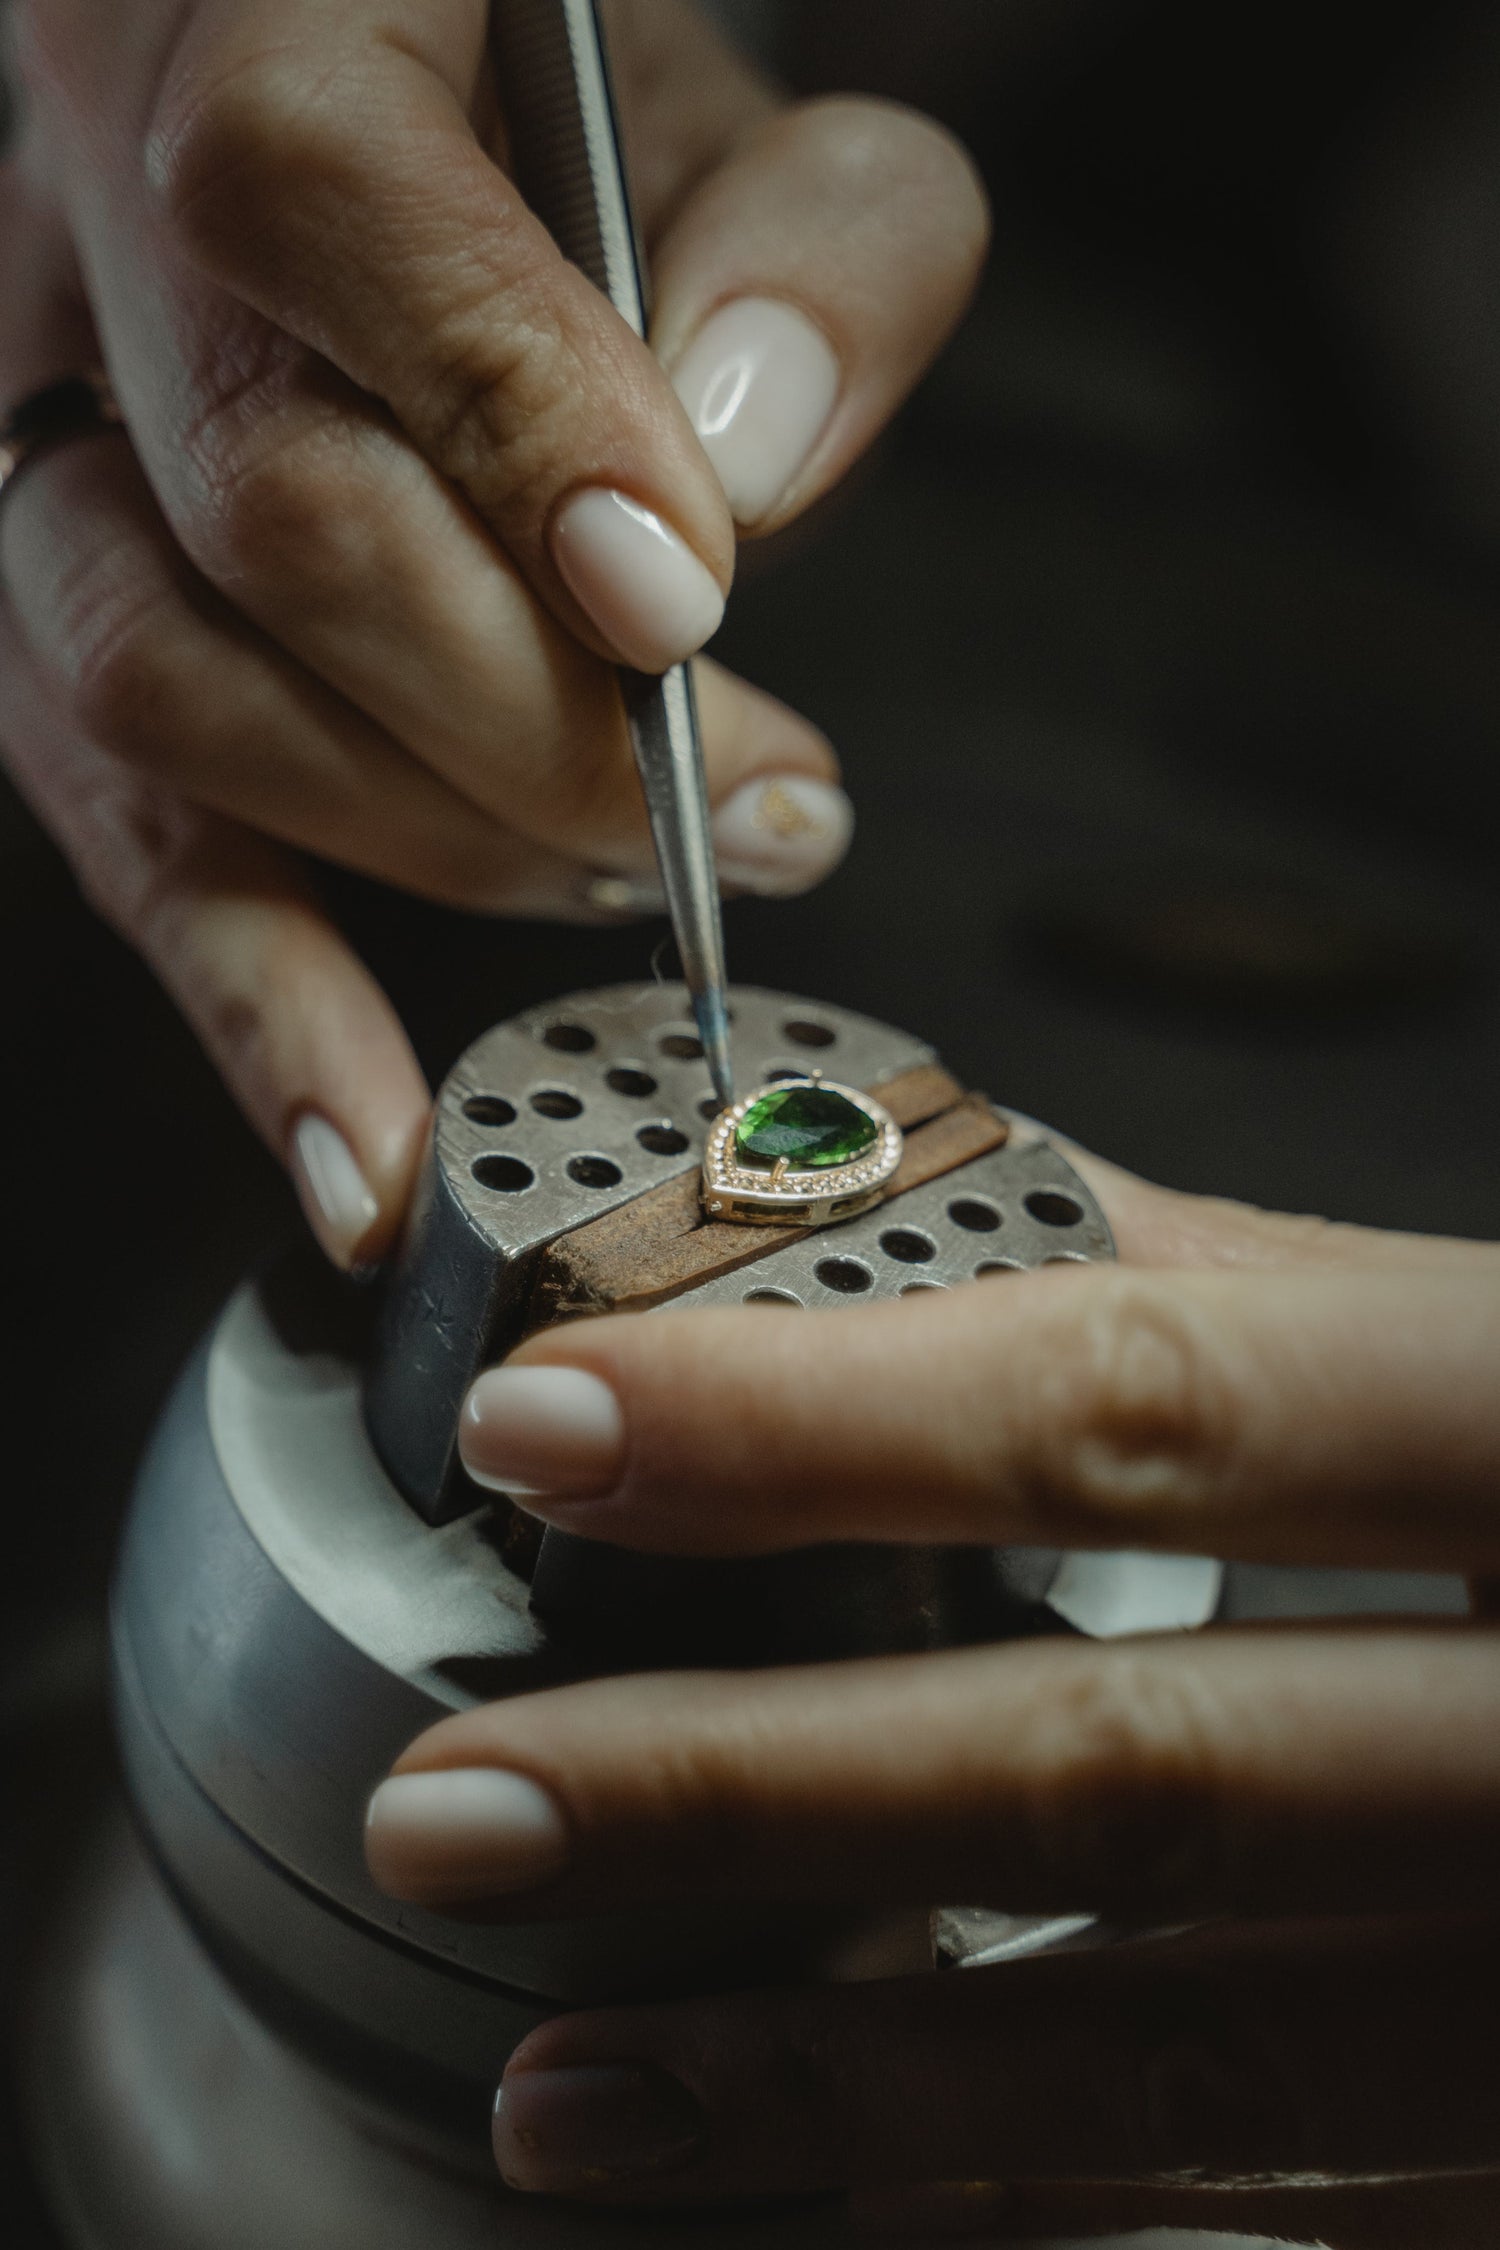 A Jeweler working on an Emerald (panna stone) Ring